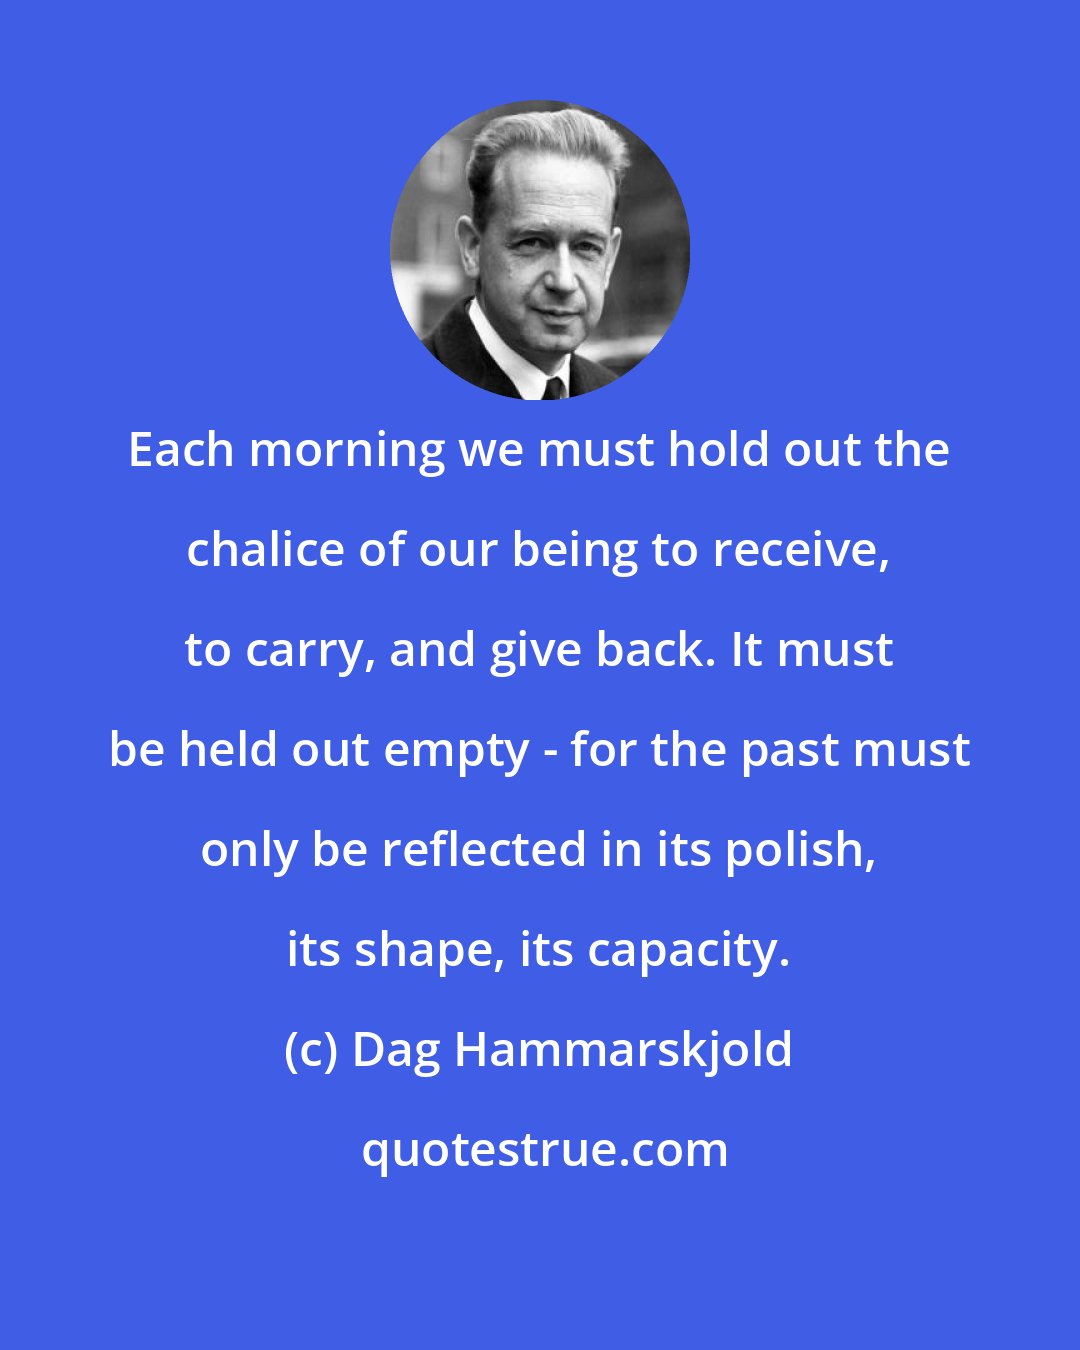 Dag Hammarskjold: Each morning we must hold out the chalice of our being to receive, to carry, and give back. It must be held out empty - for the past must only be reflected in its polish, its shape, its capacity.